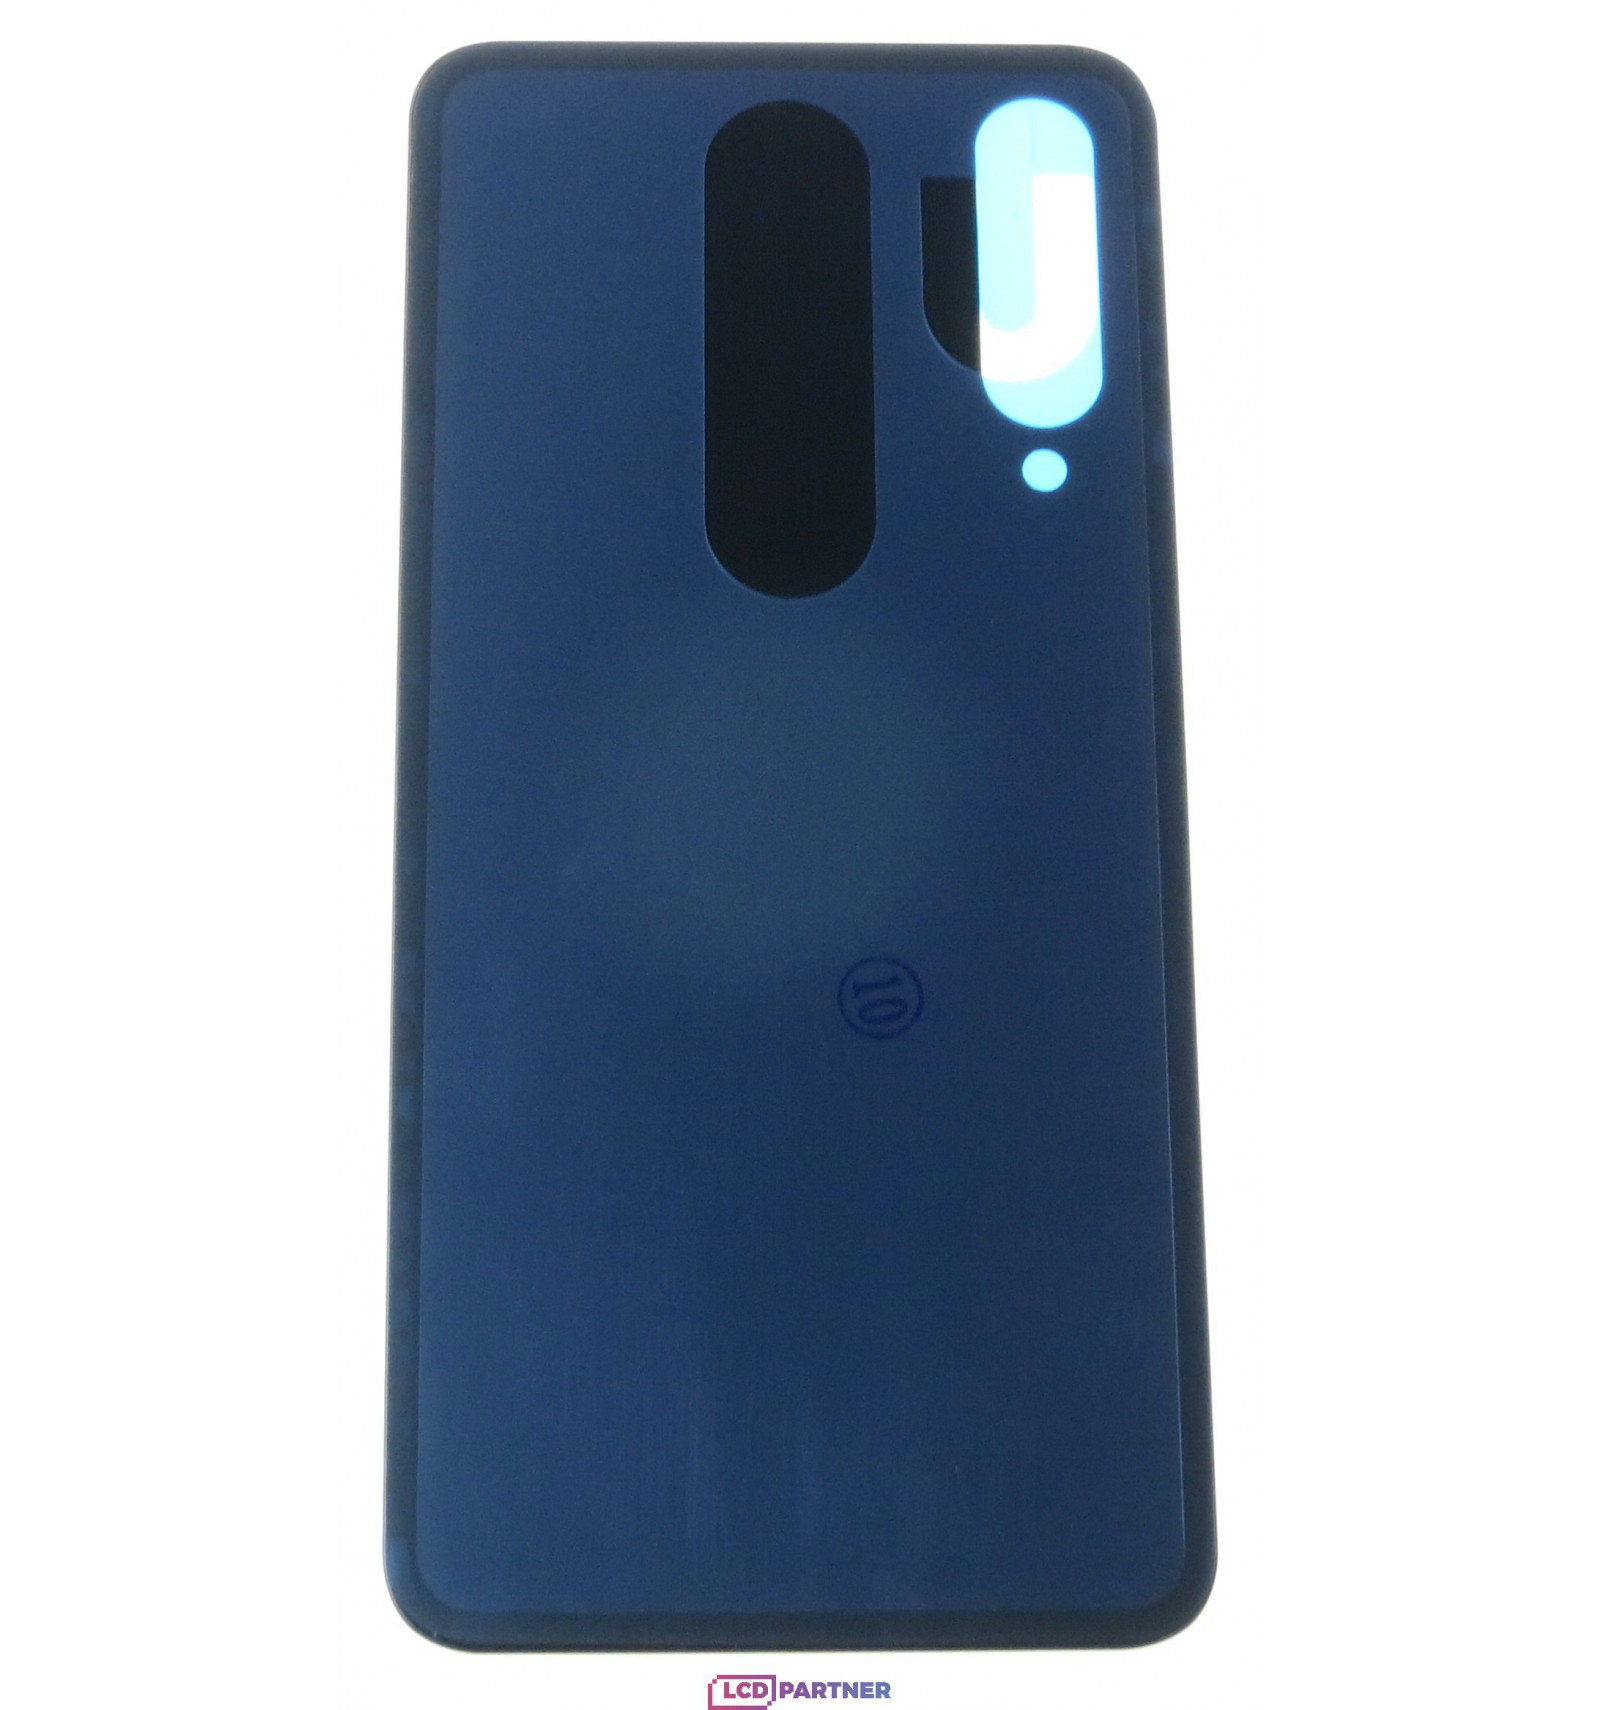 Stop by did it Norm Battery cover black replacement for Xiaomi Mi 9 SE | lcdpartner.com